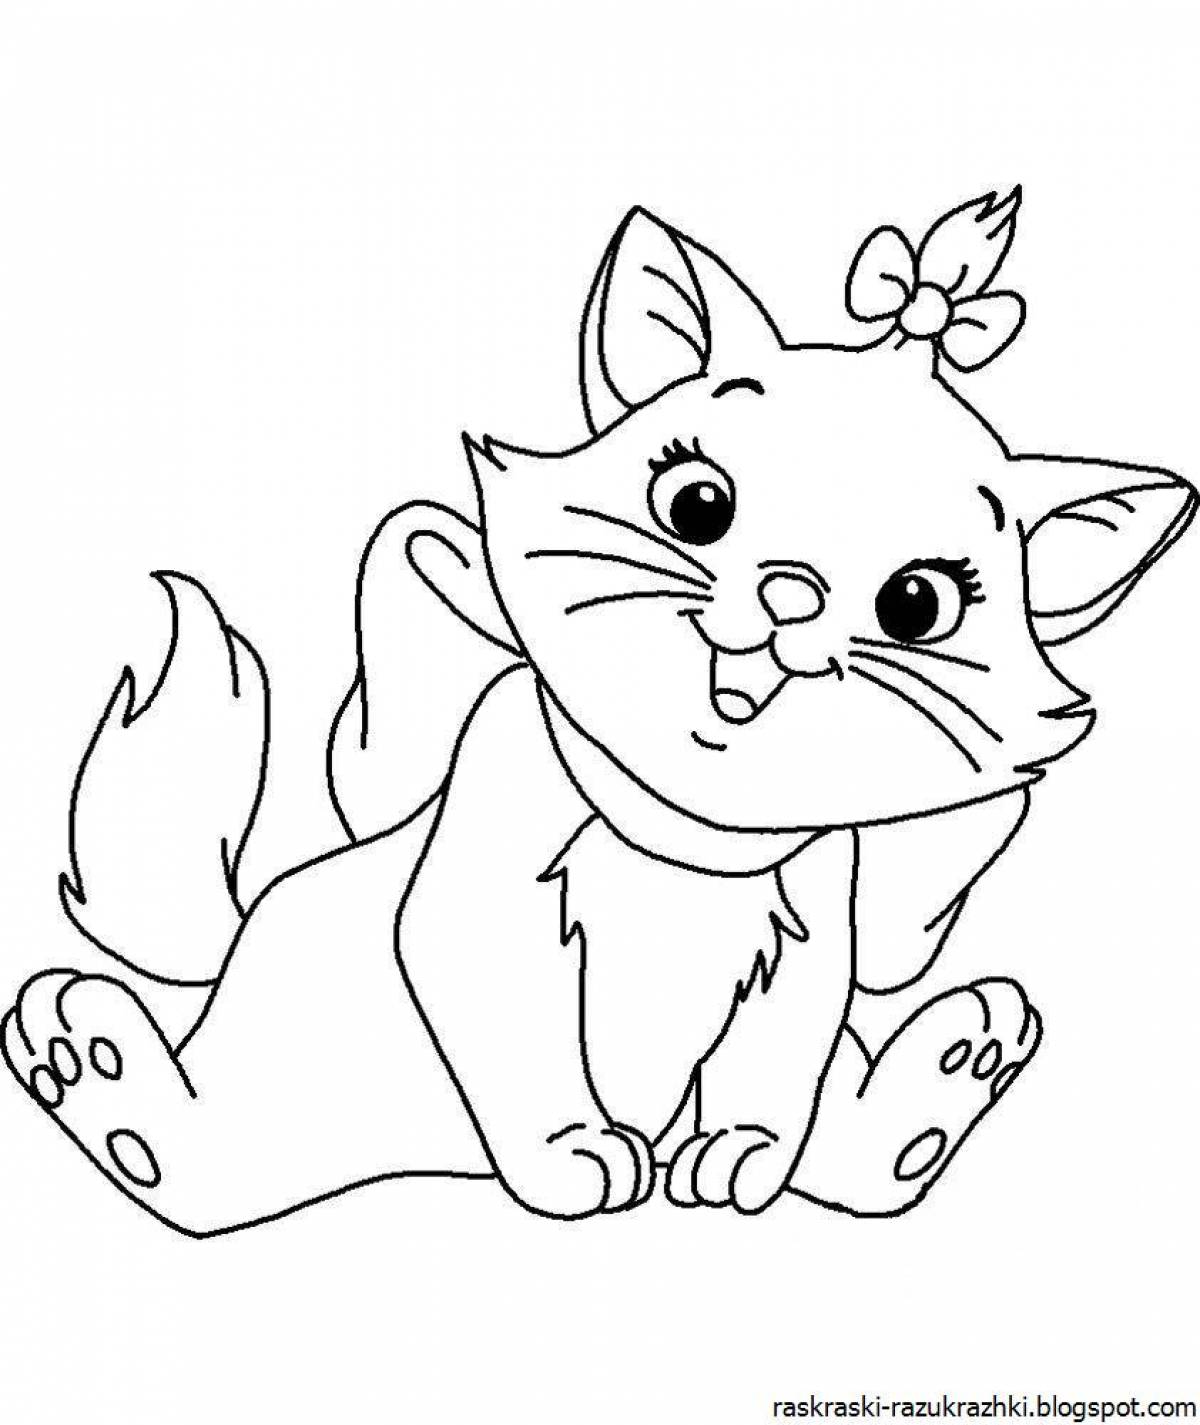 Fancy coloring kitty for kids